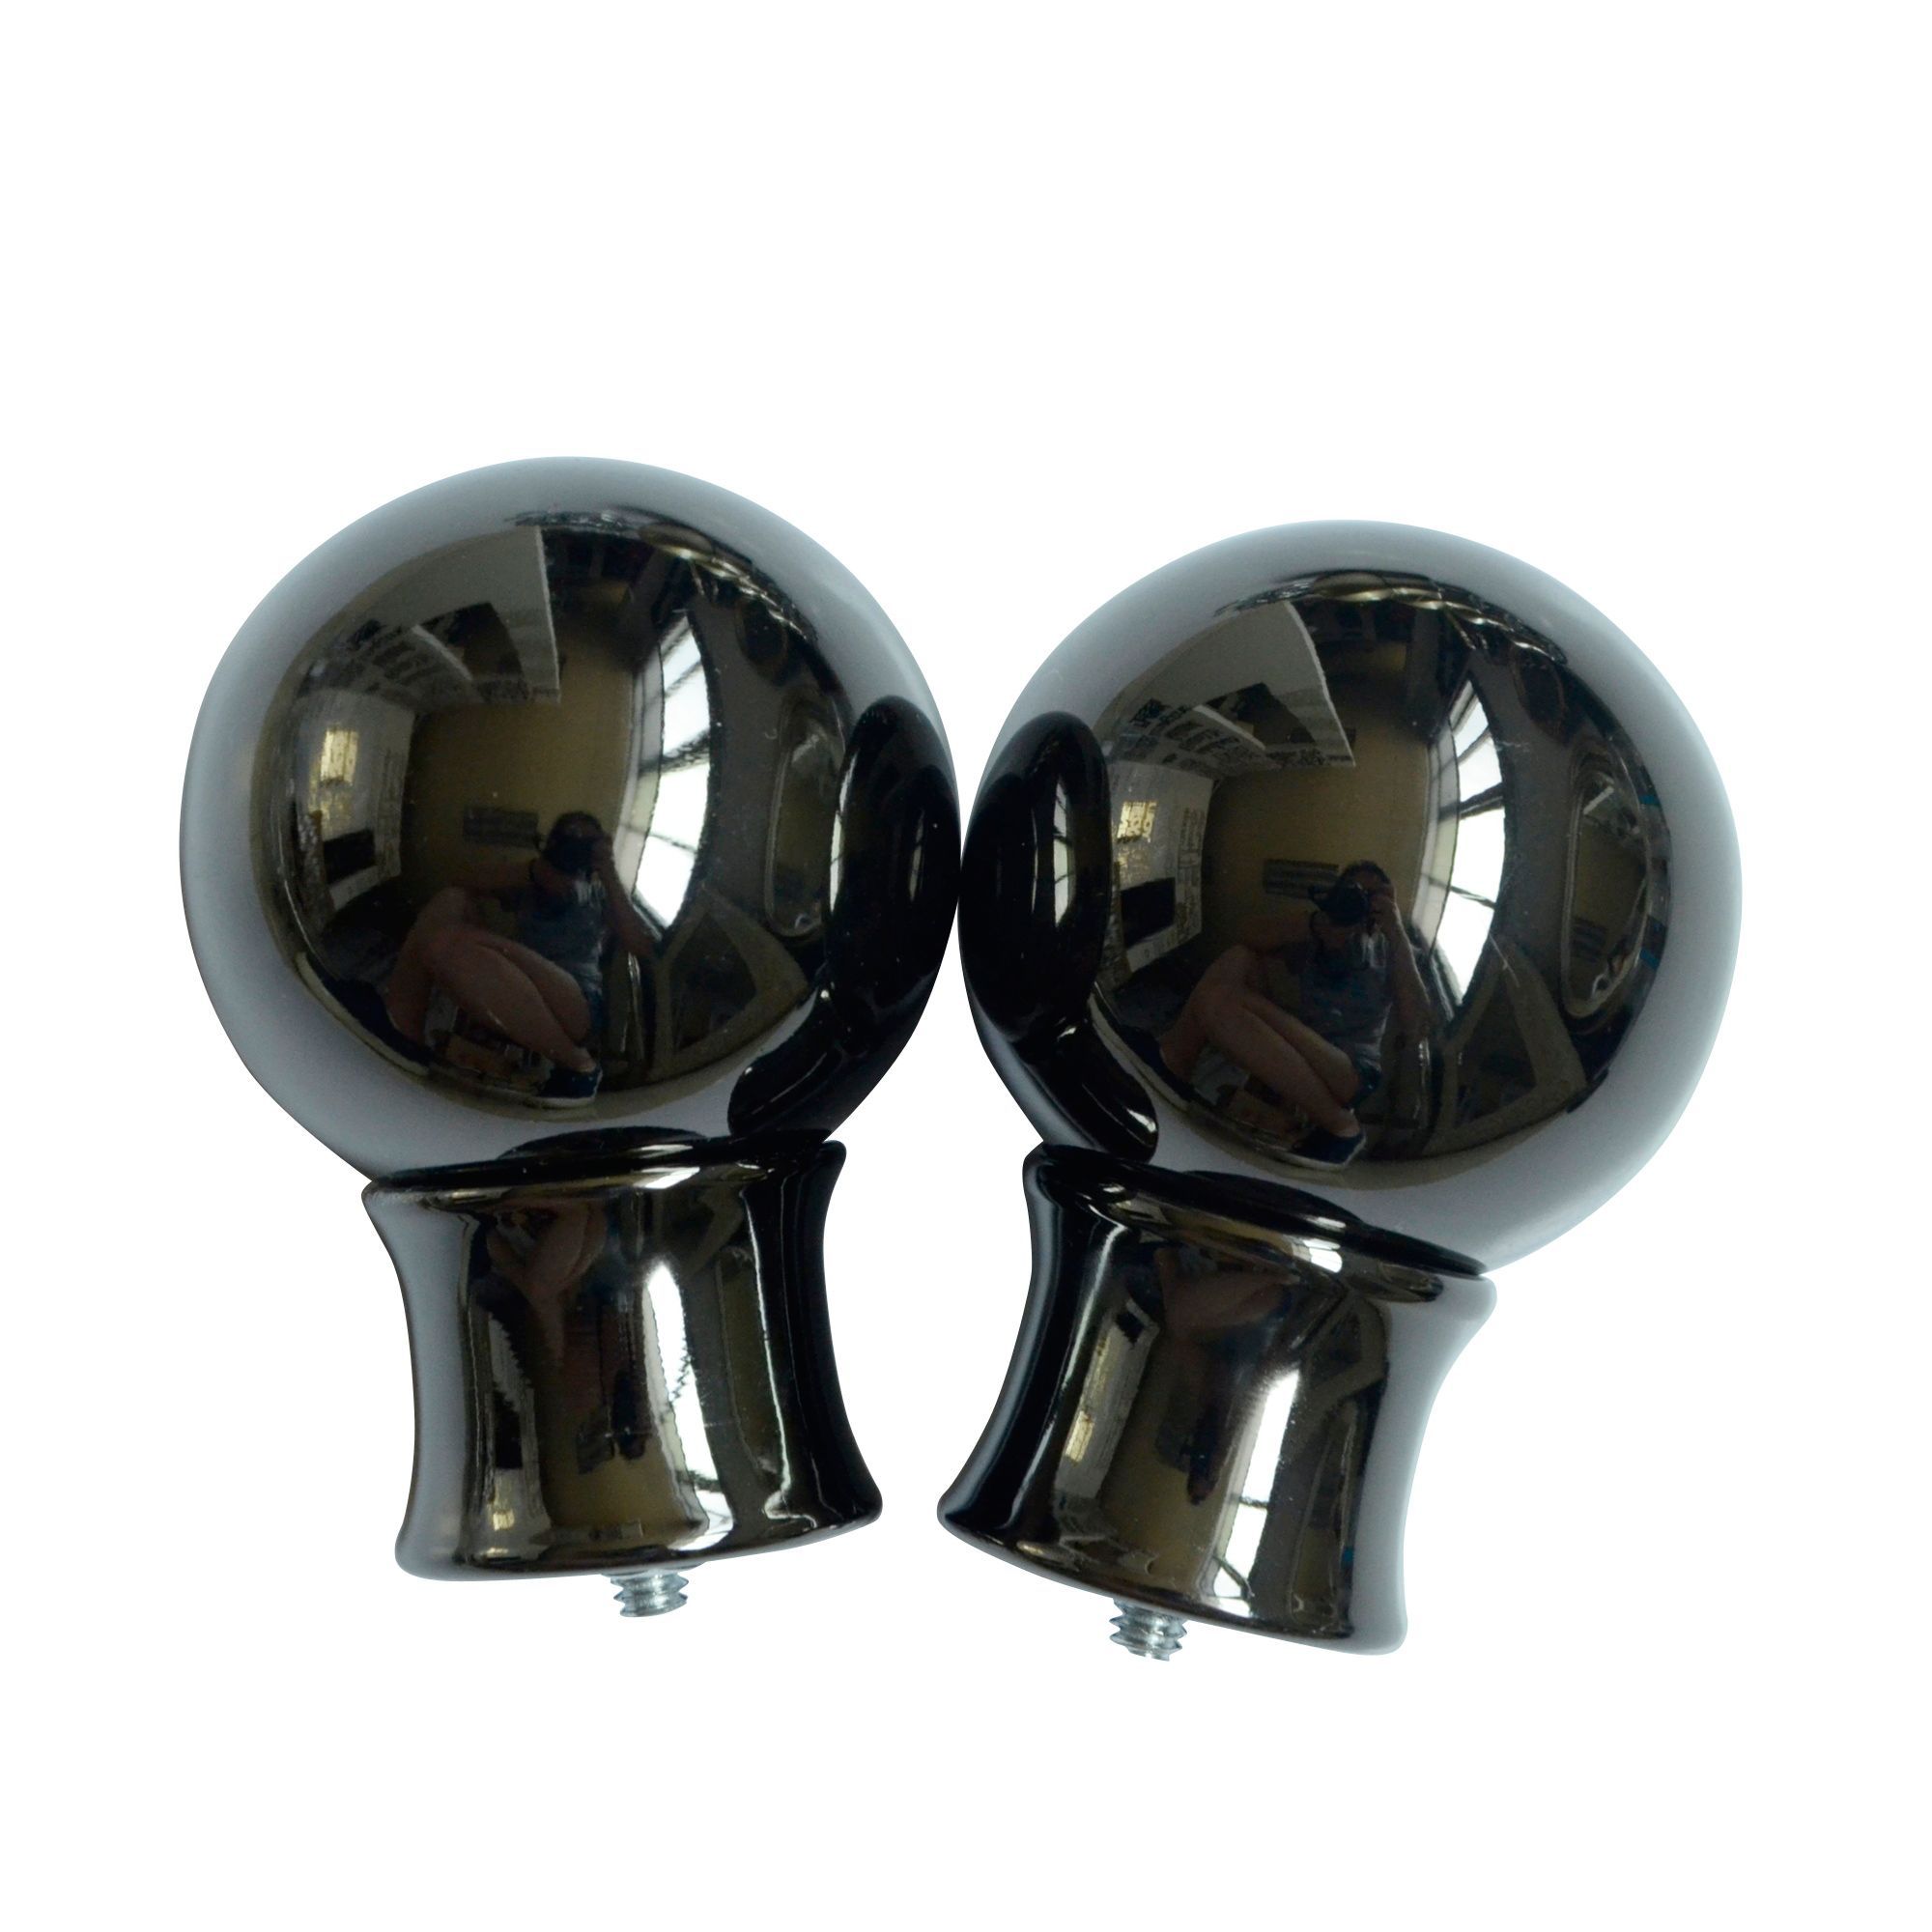 Nickel effect Black Ball Curtain pole finial, Pack of 2